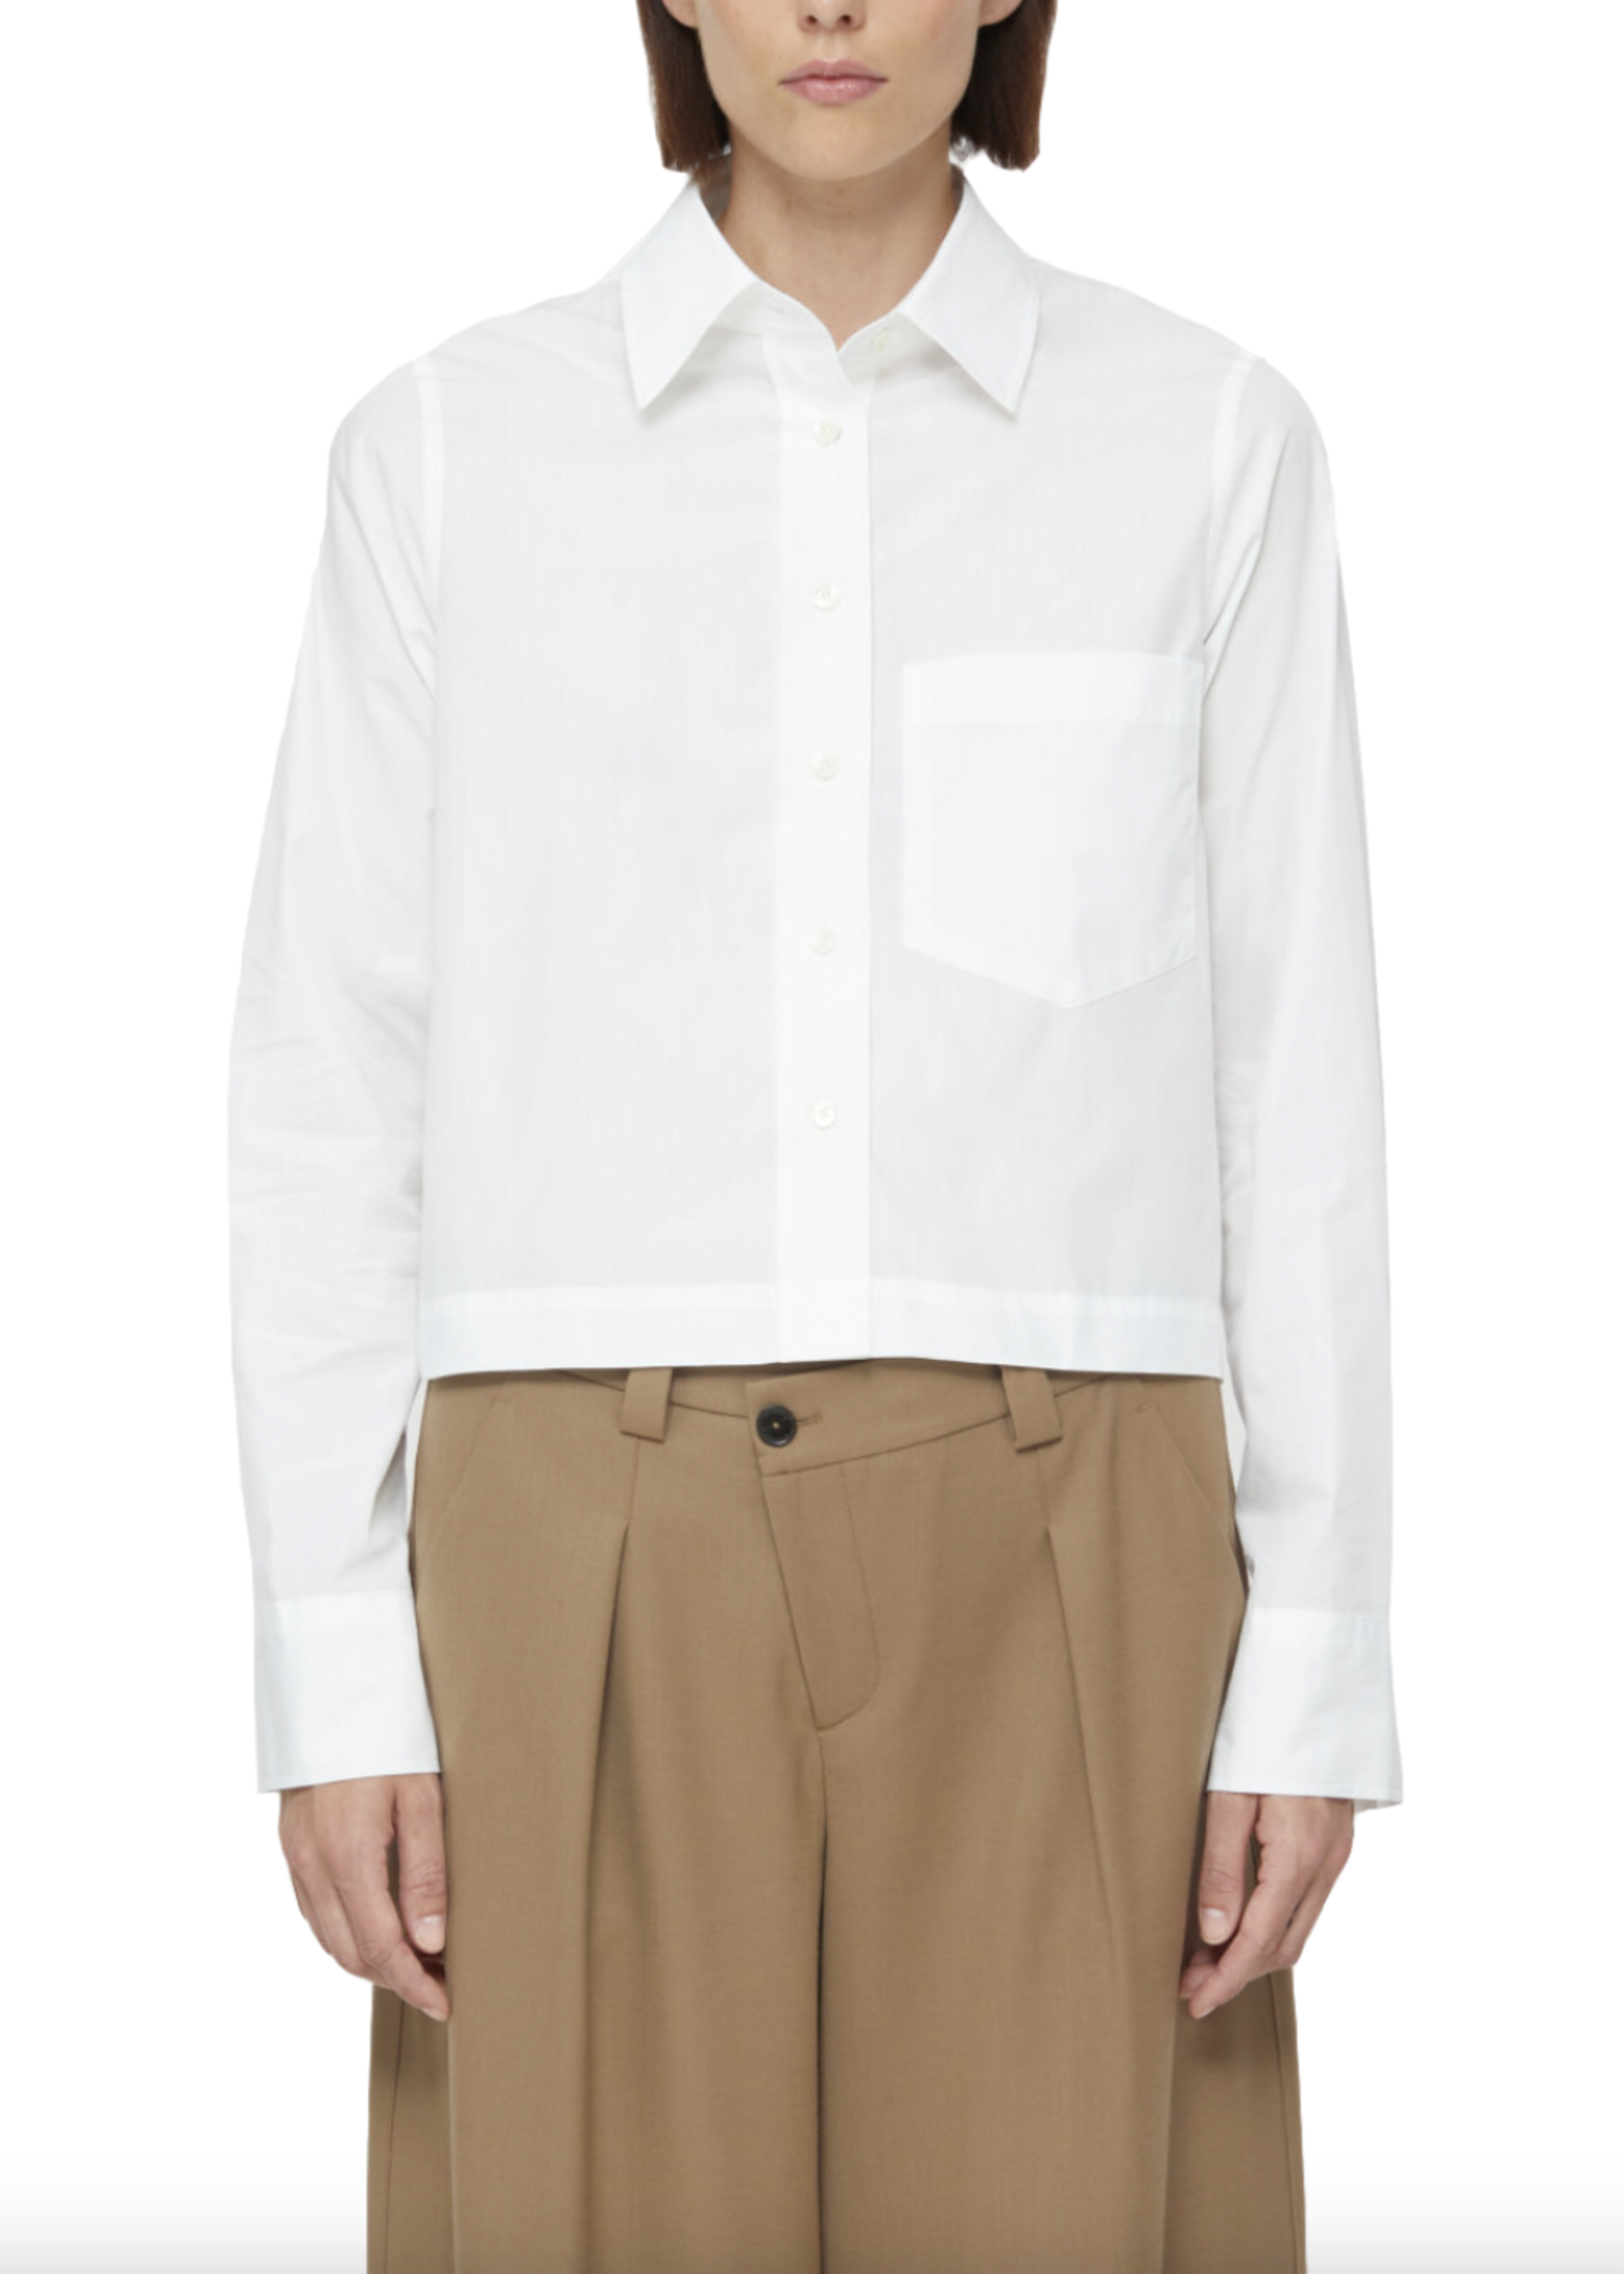 Closed Closed Cropped Classic Shirt